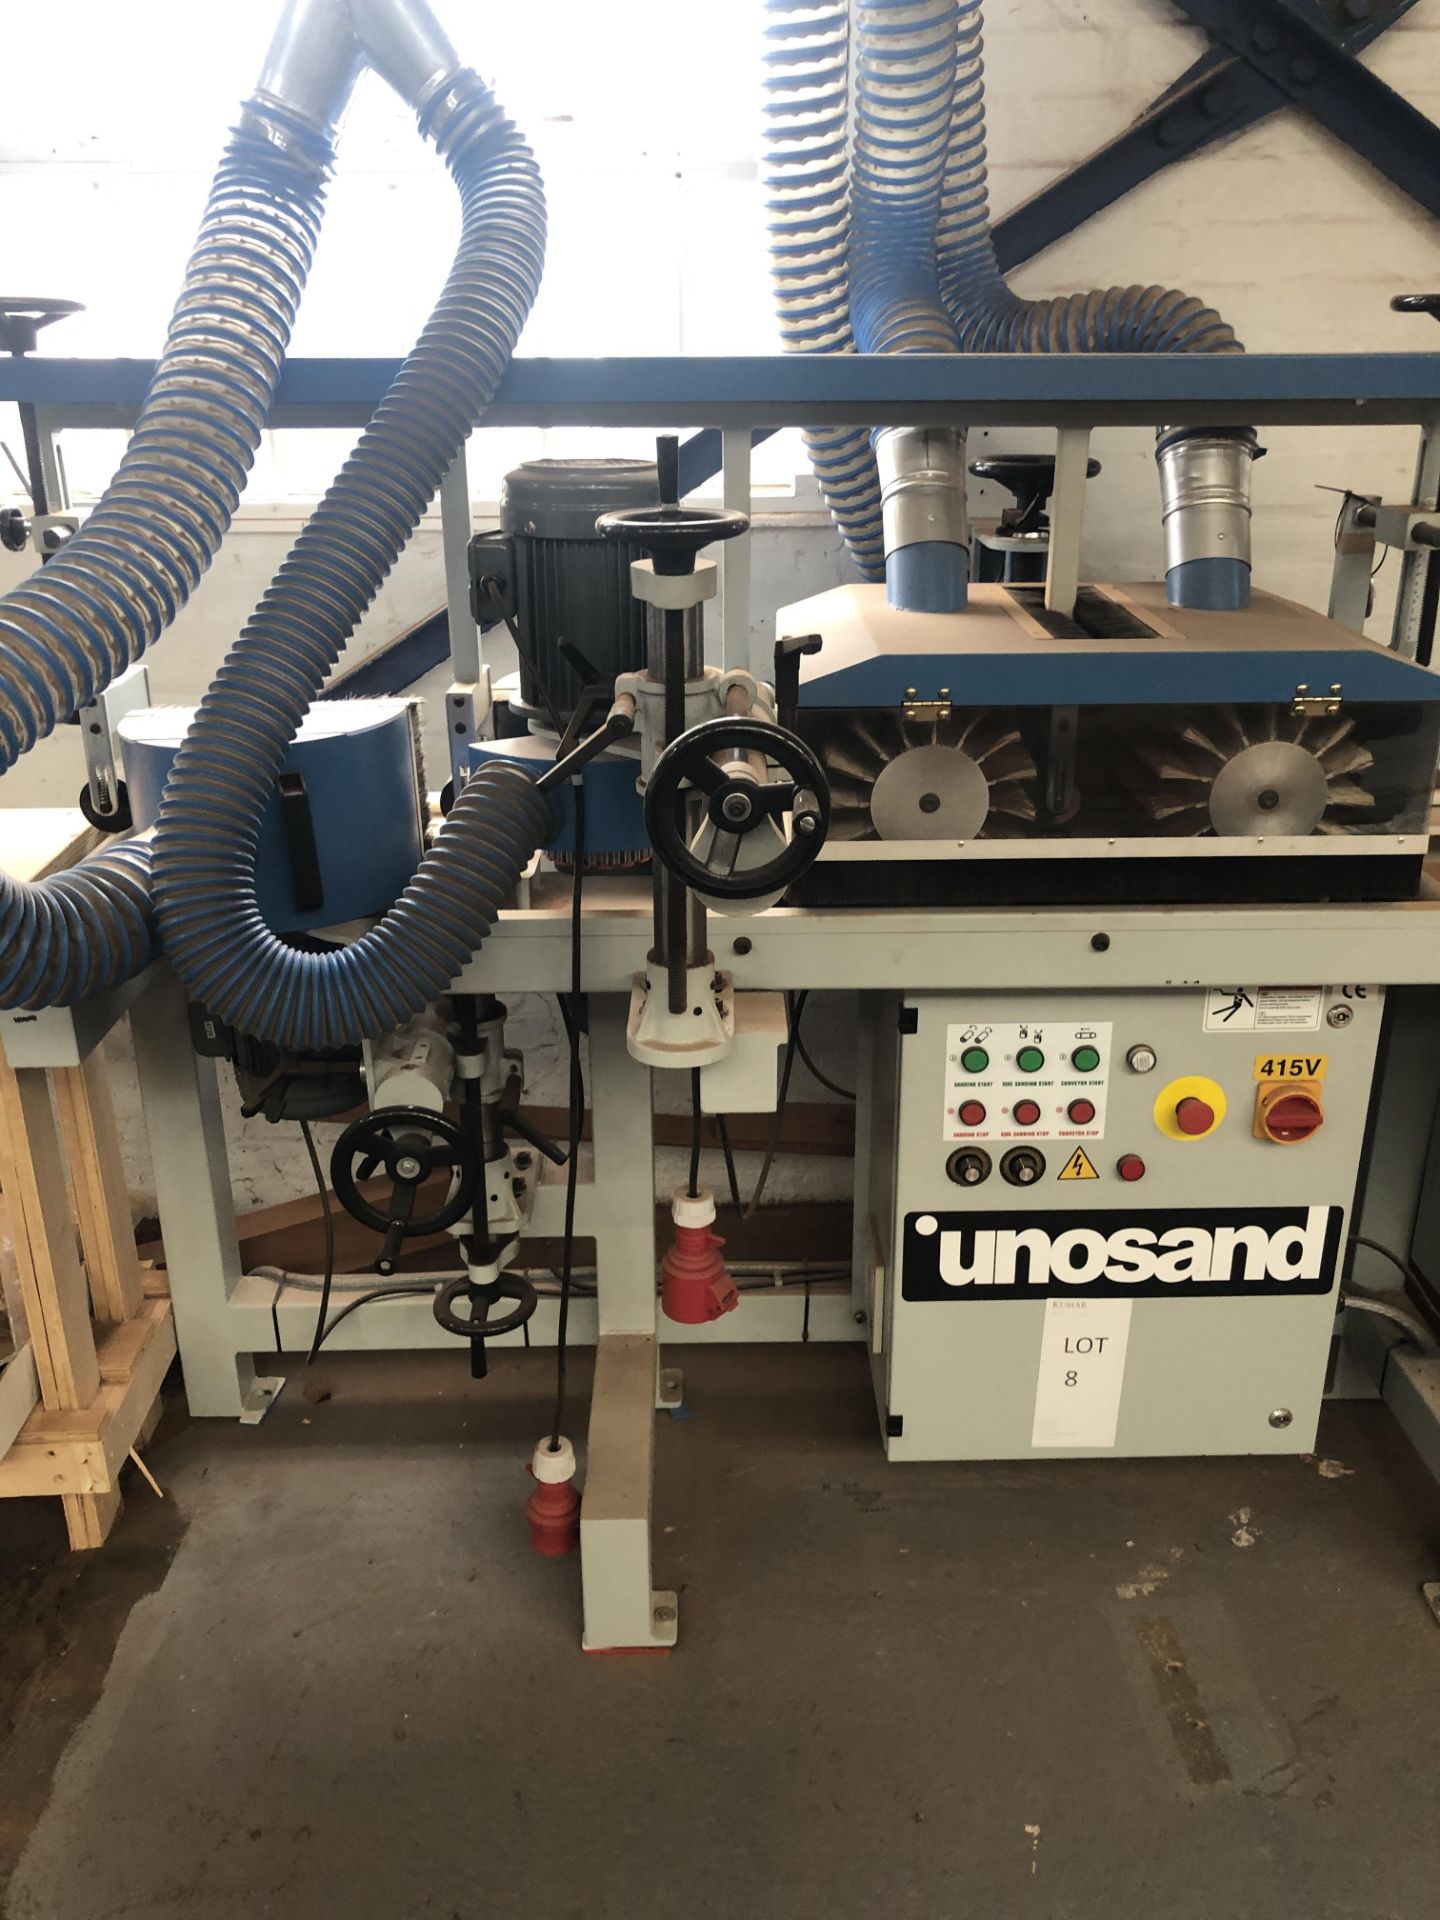 Unosand Model SL/300/55 Sanding Machine Serial No: H3074 (11/2016) 3phase(Please note: Item needs - Image 11 of 16